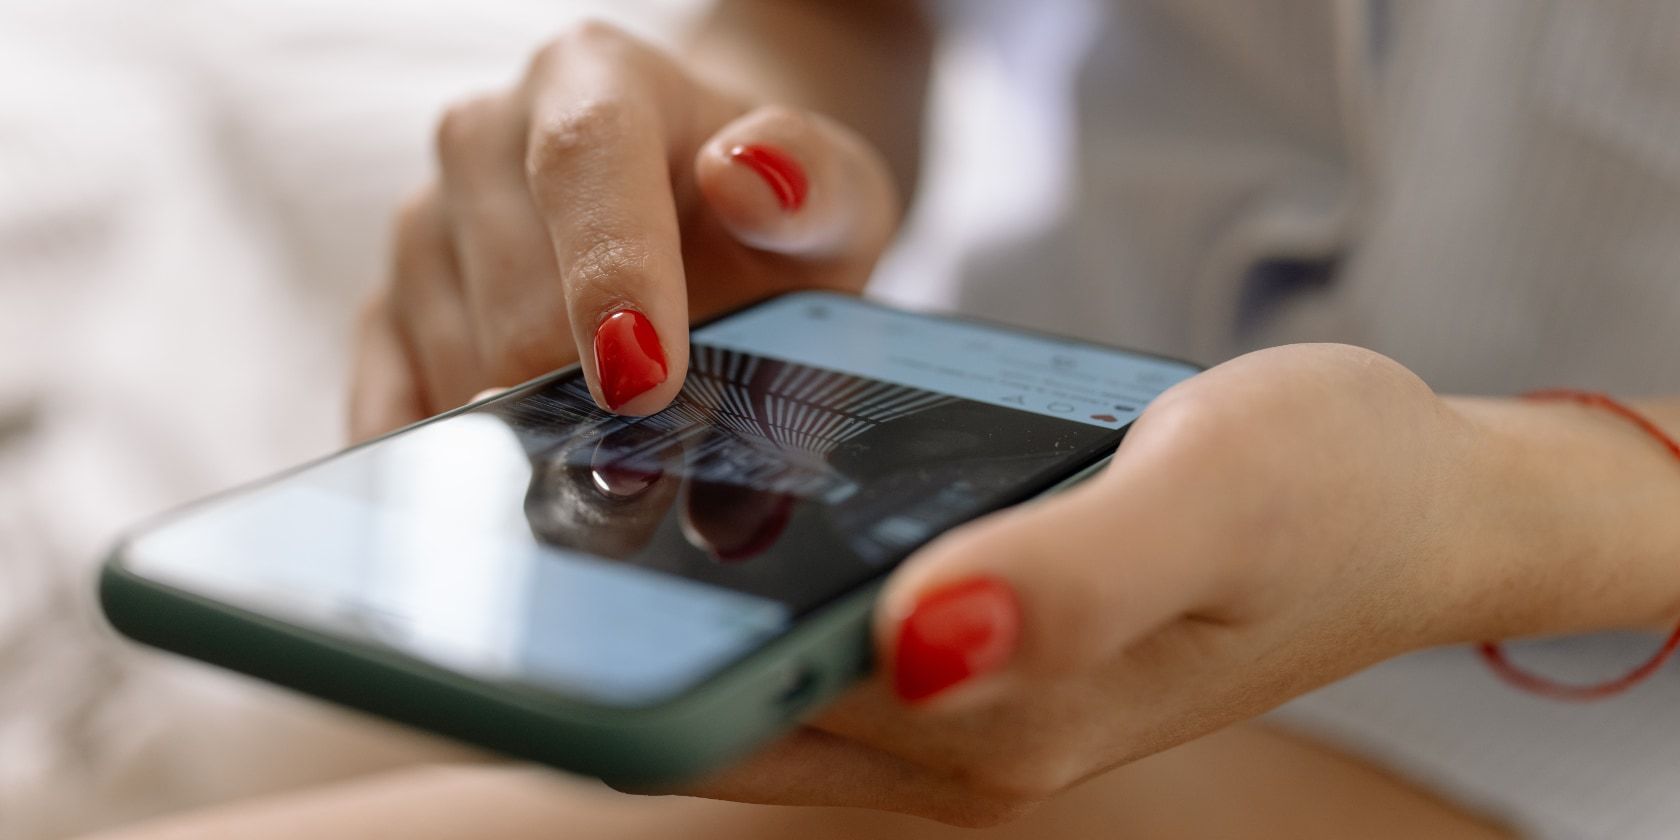 woman touching the screen of a phone